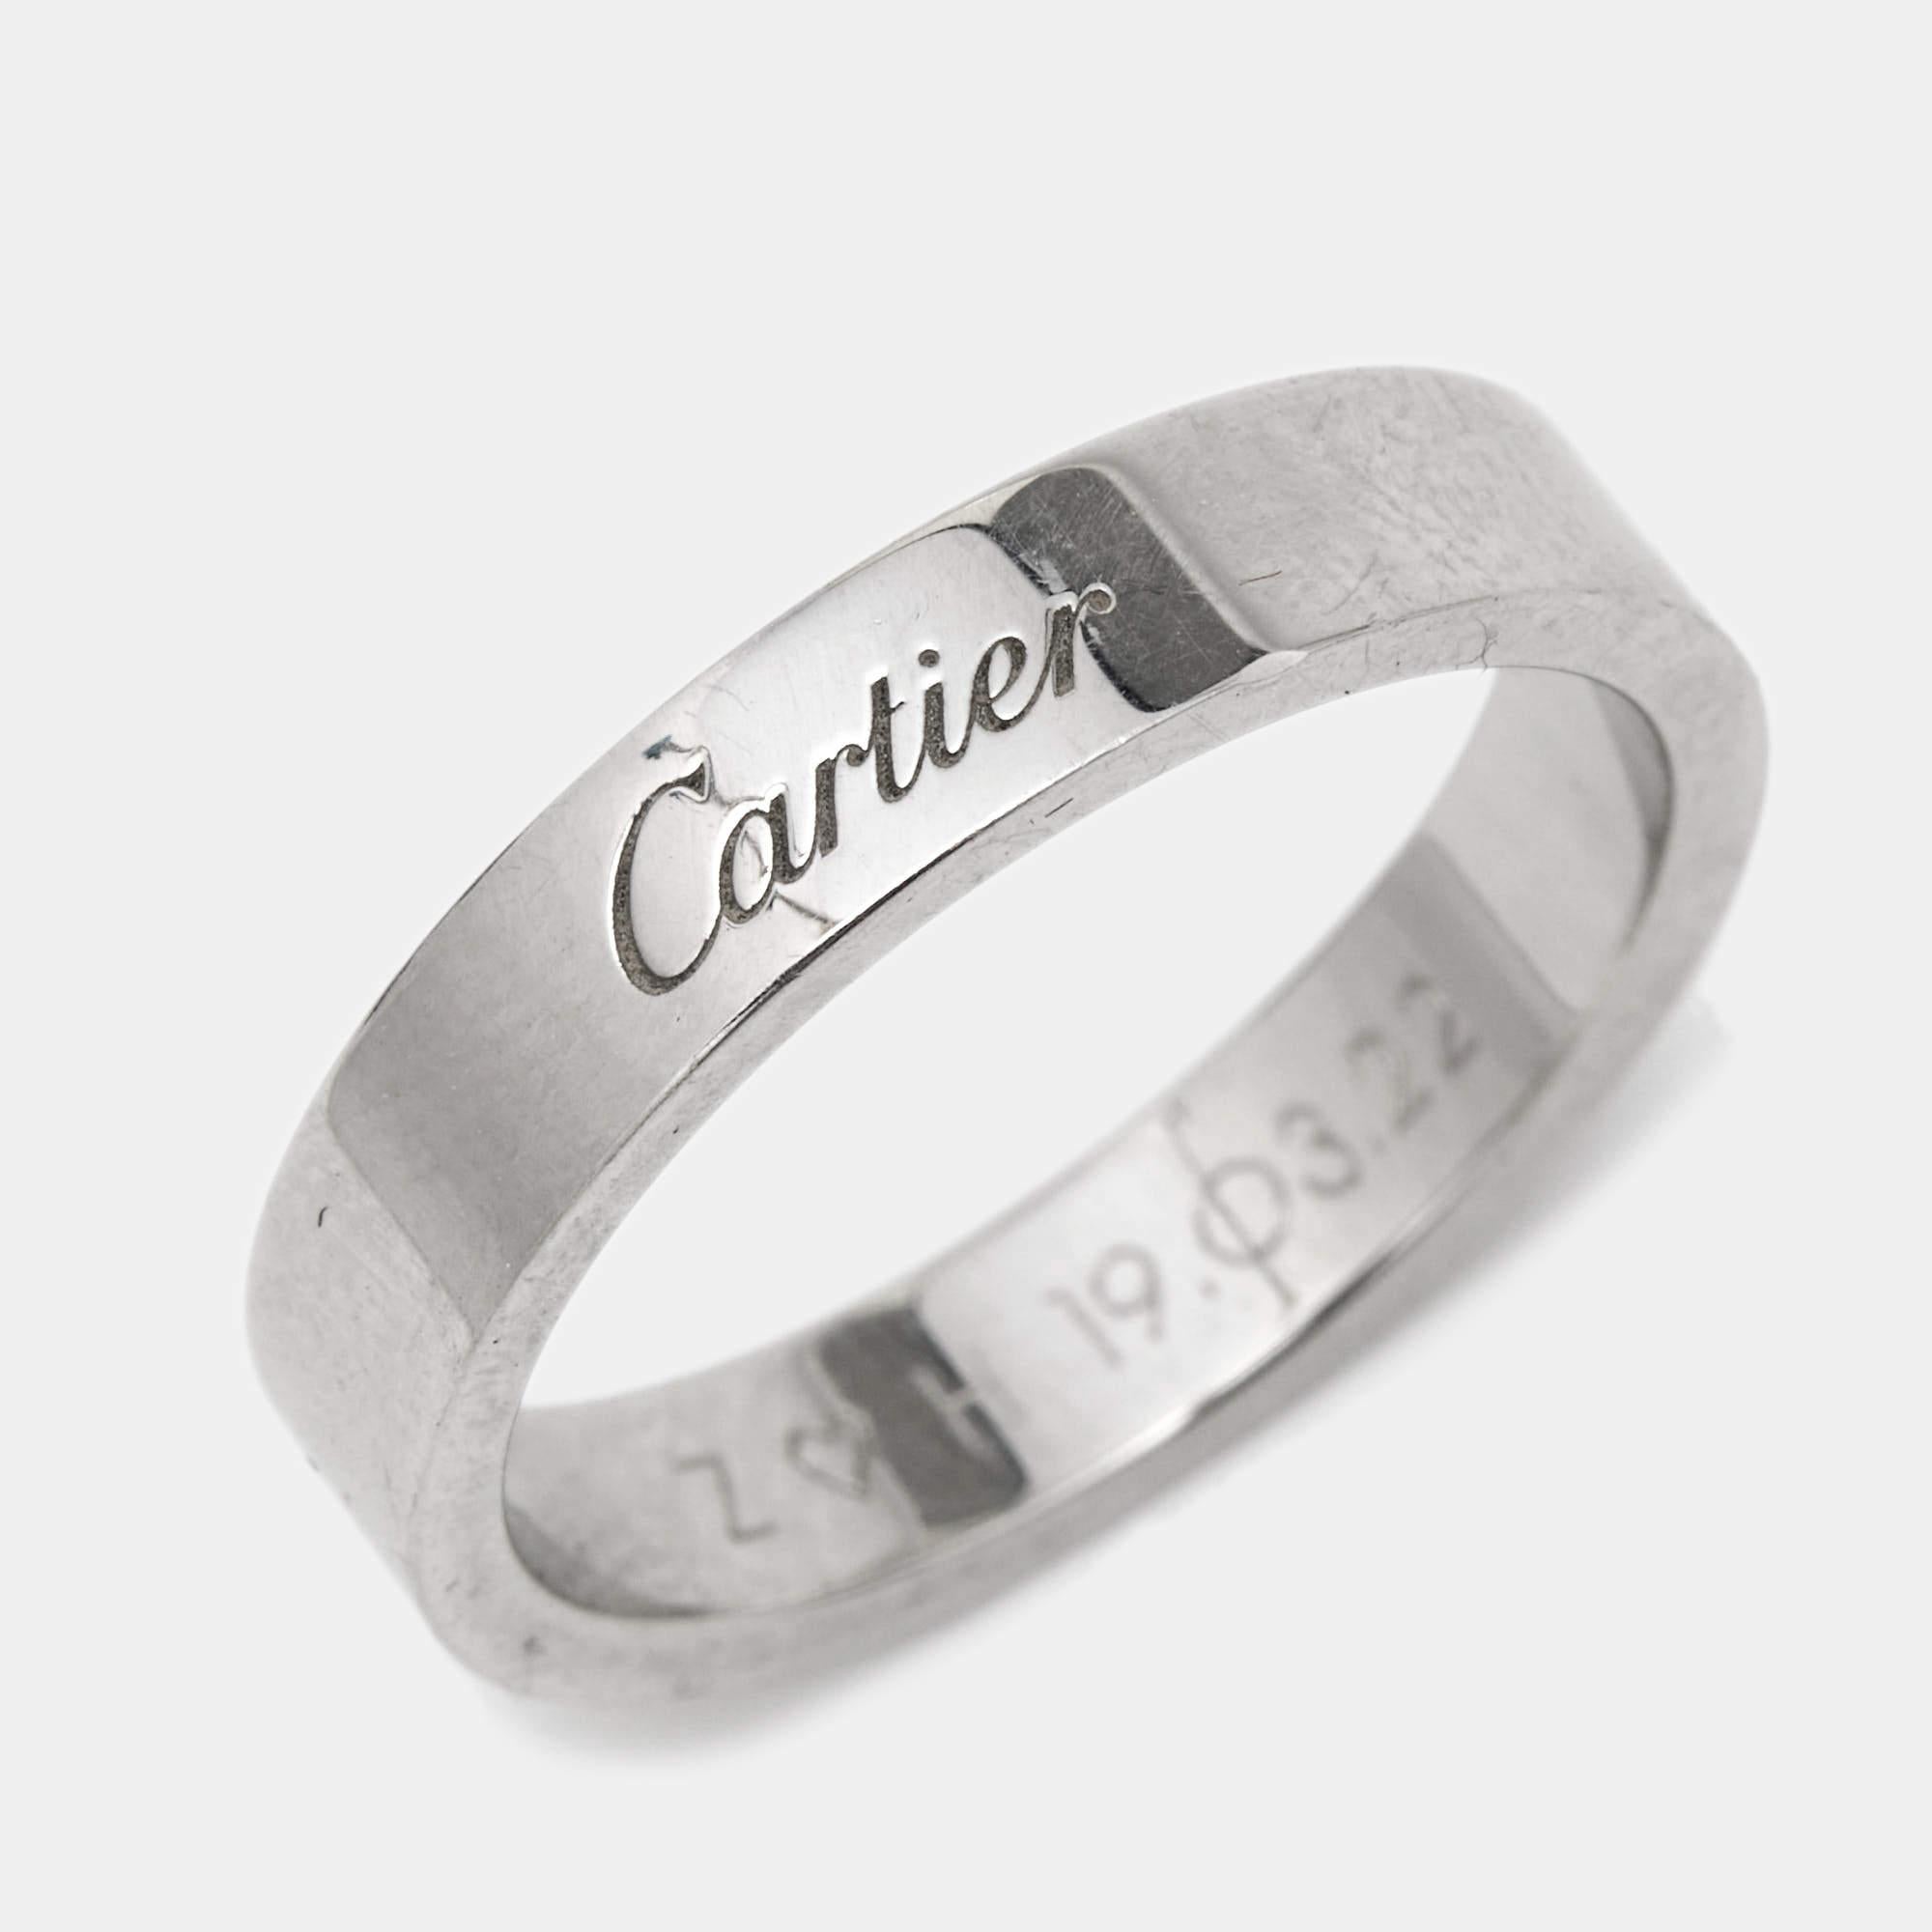 54 cartier ring size